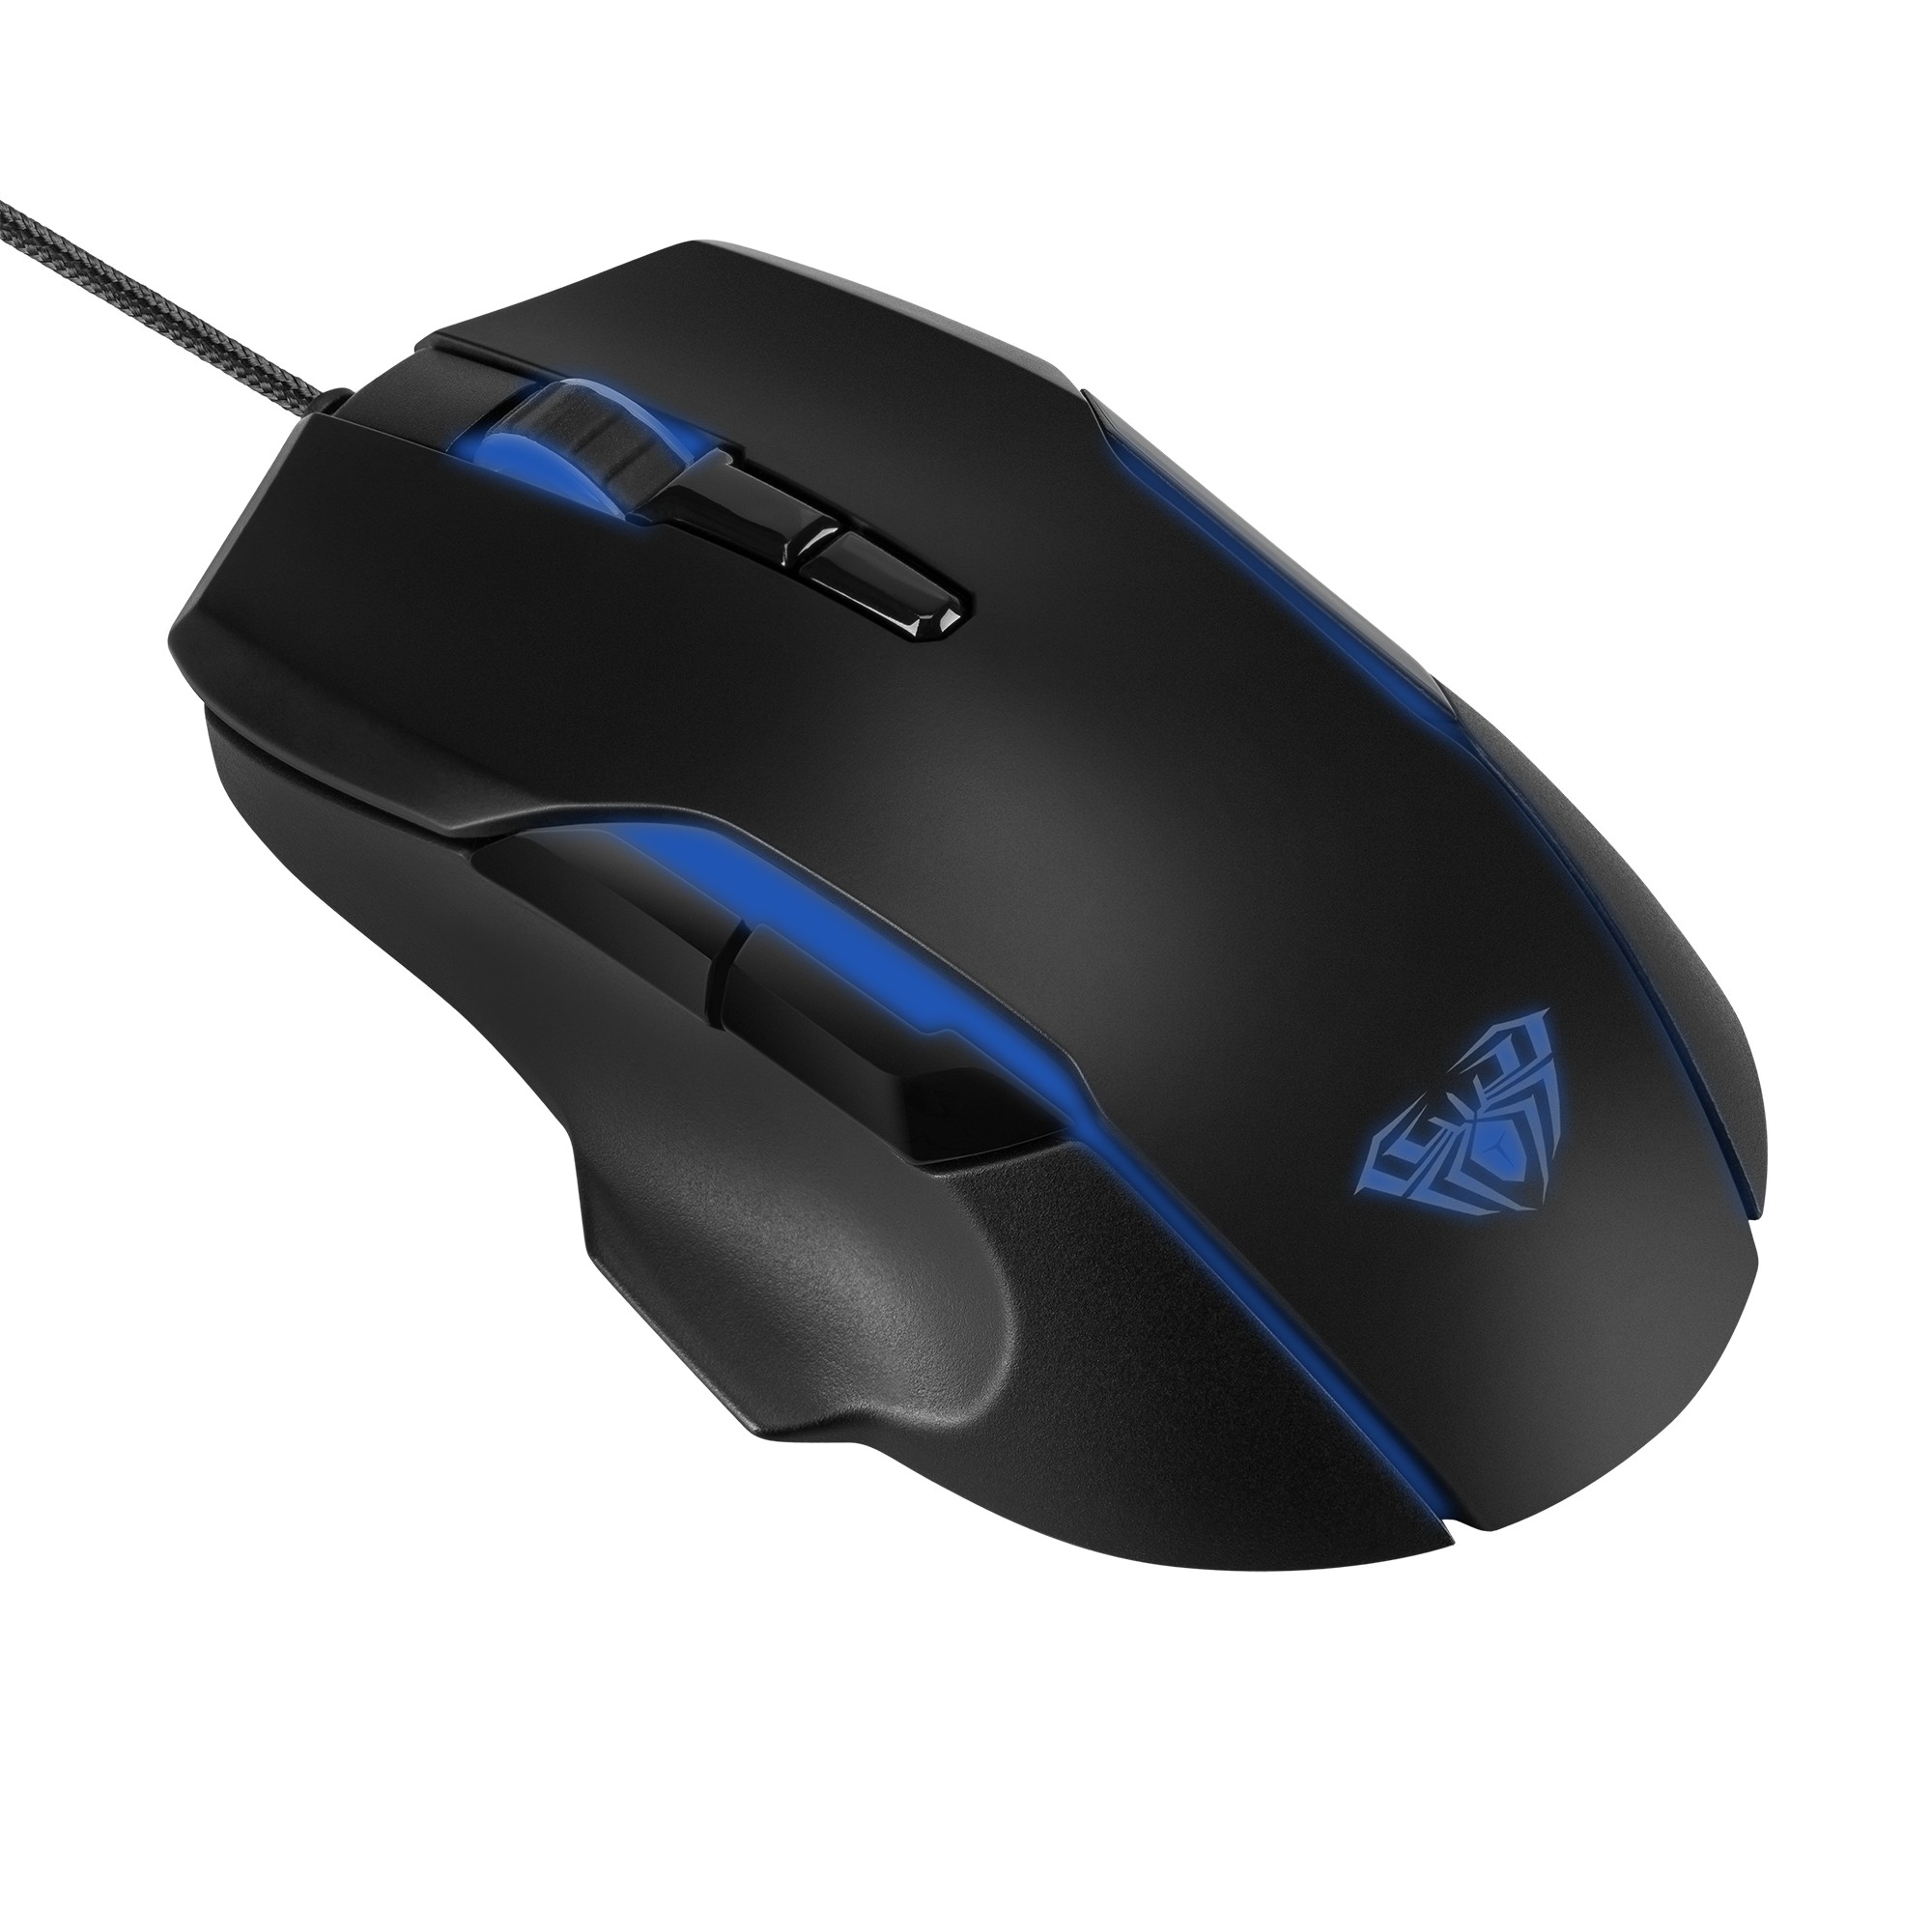 AULA Torment wired mouse | 6400 DPI